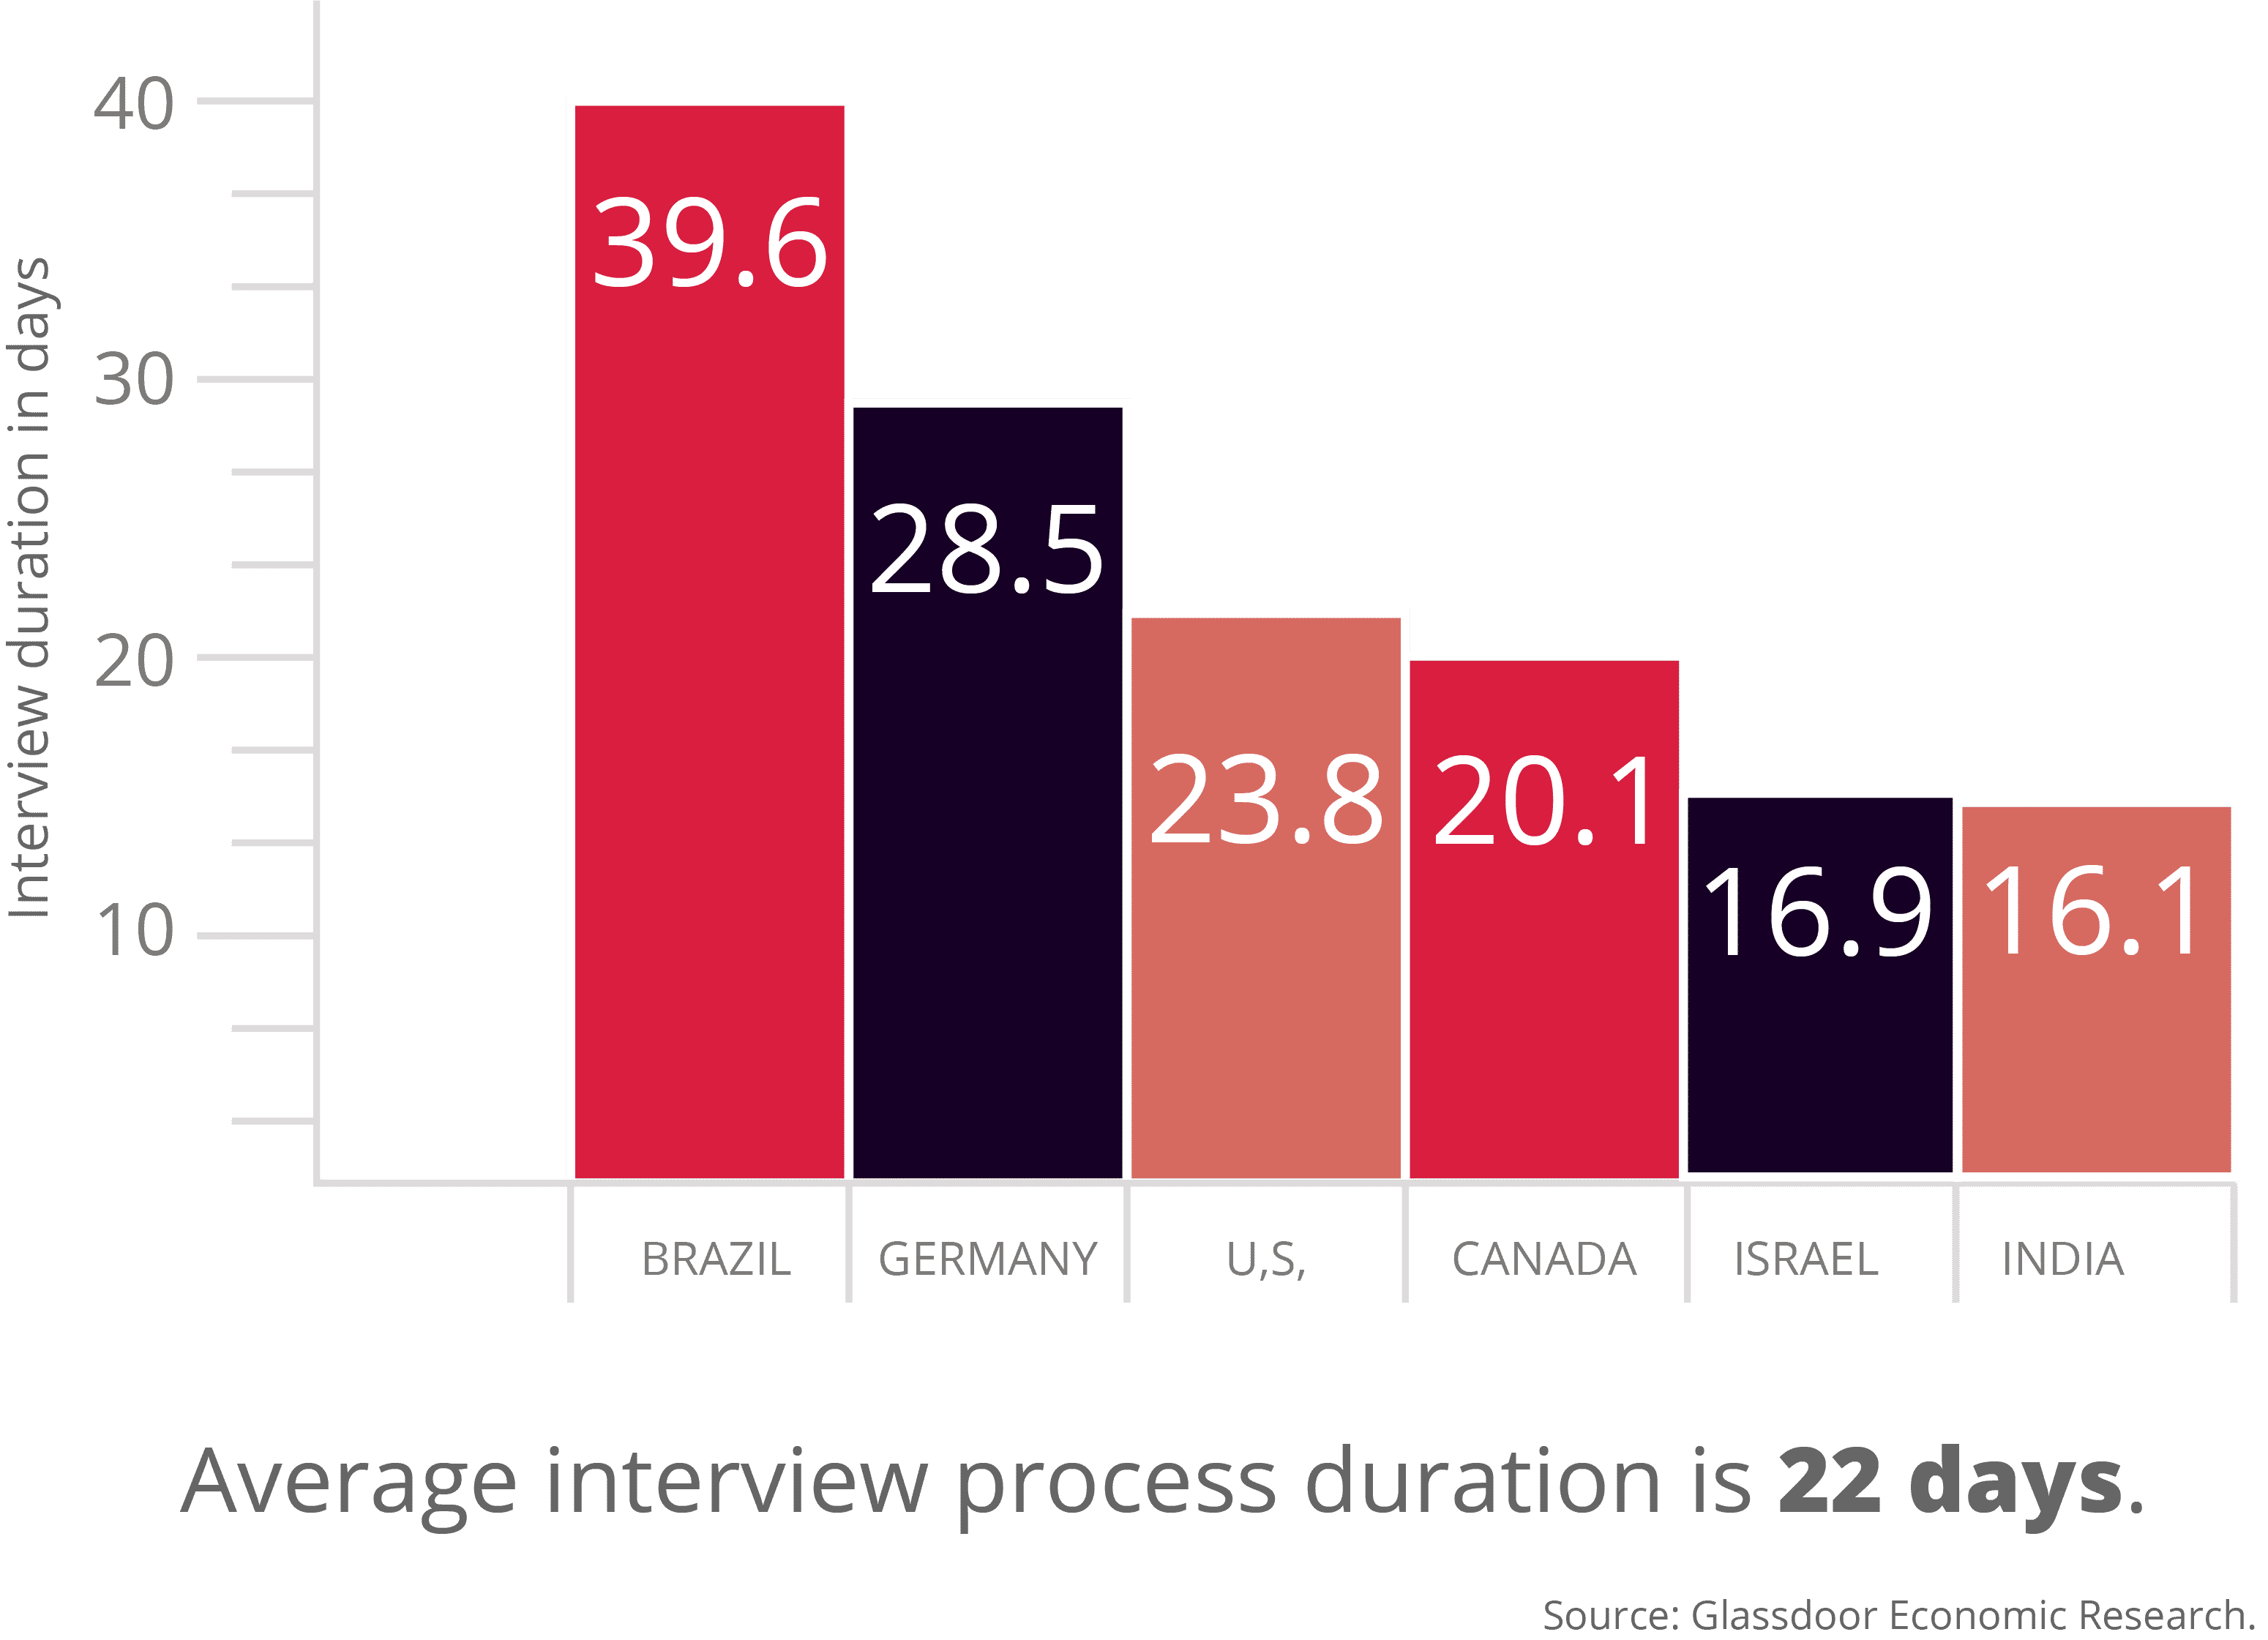 22 days for an average interview